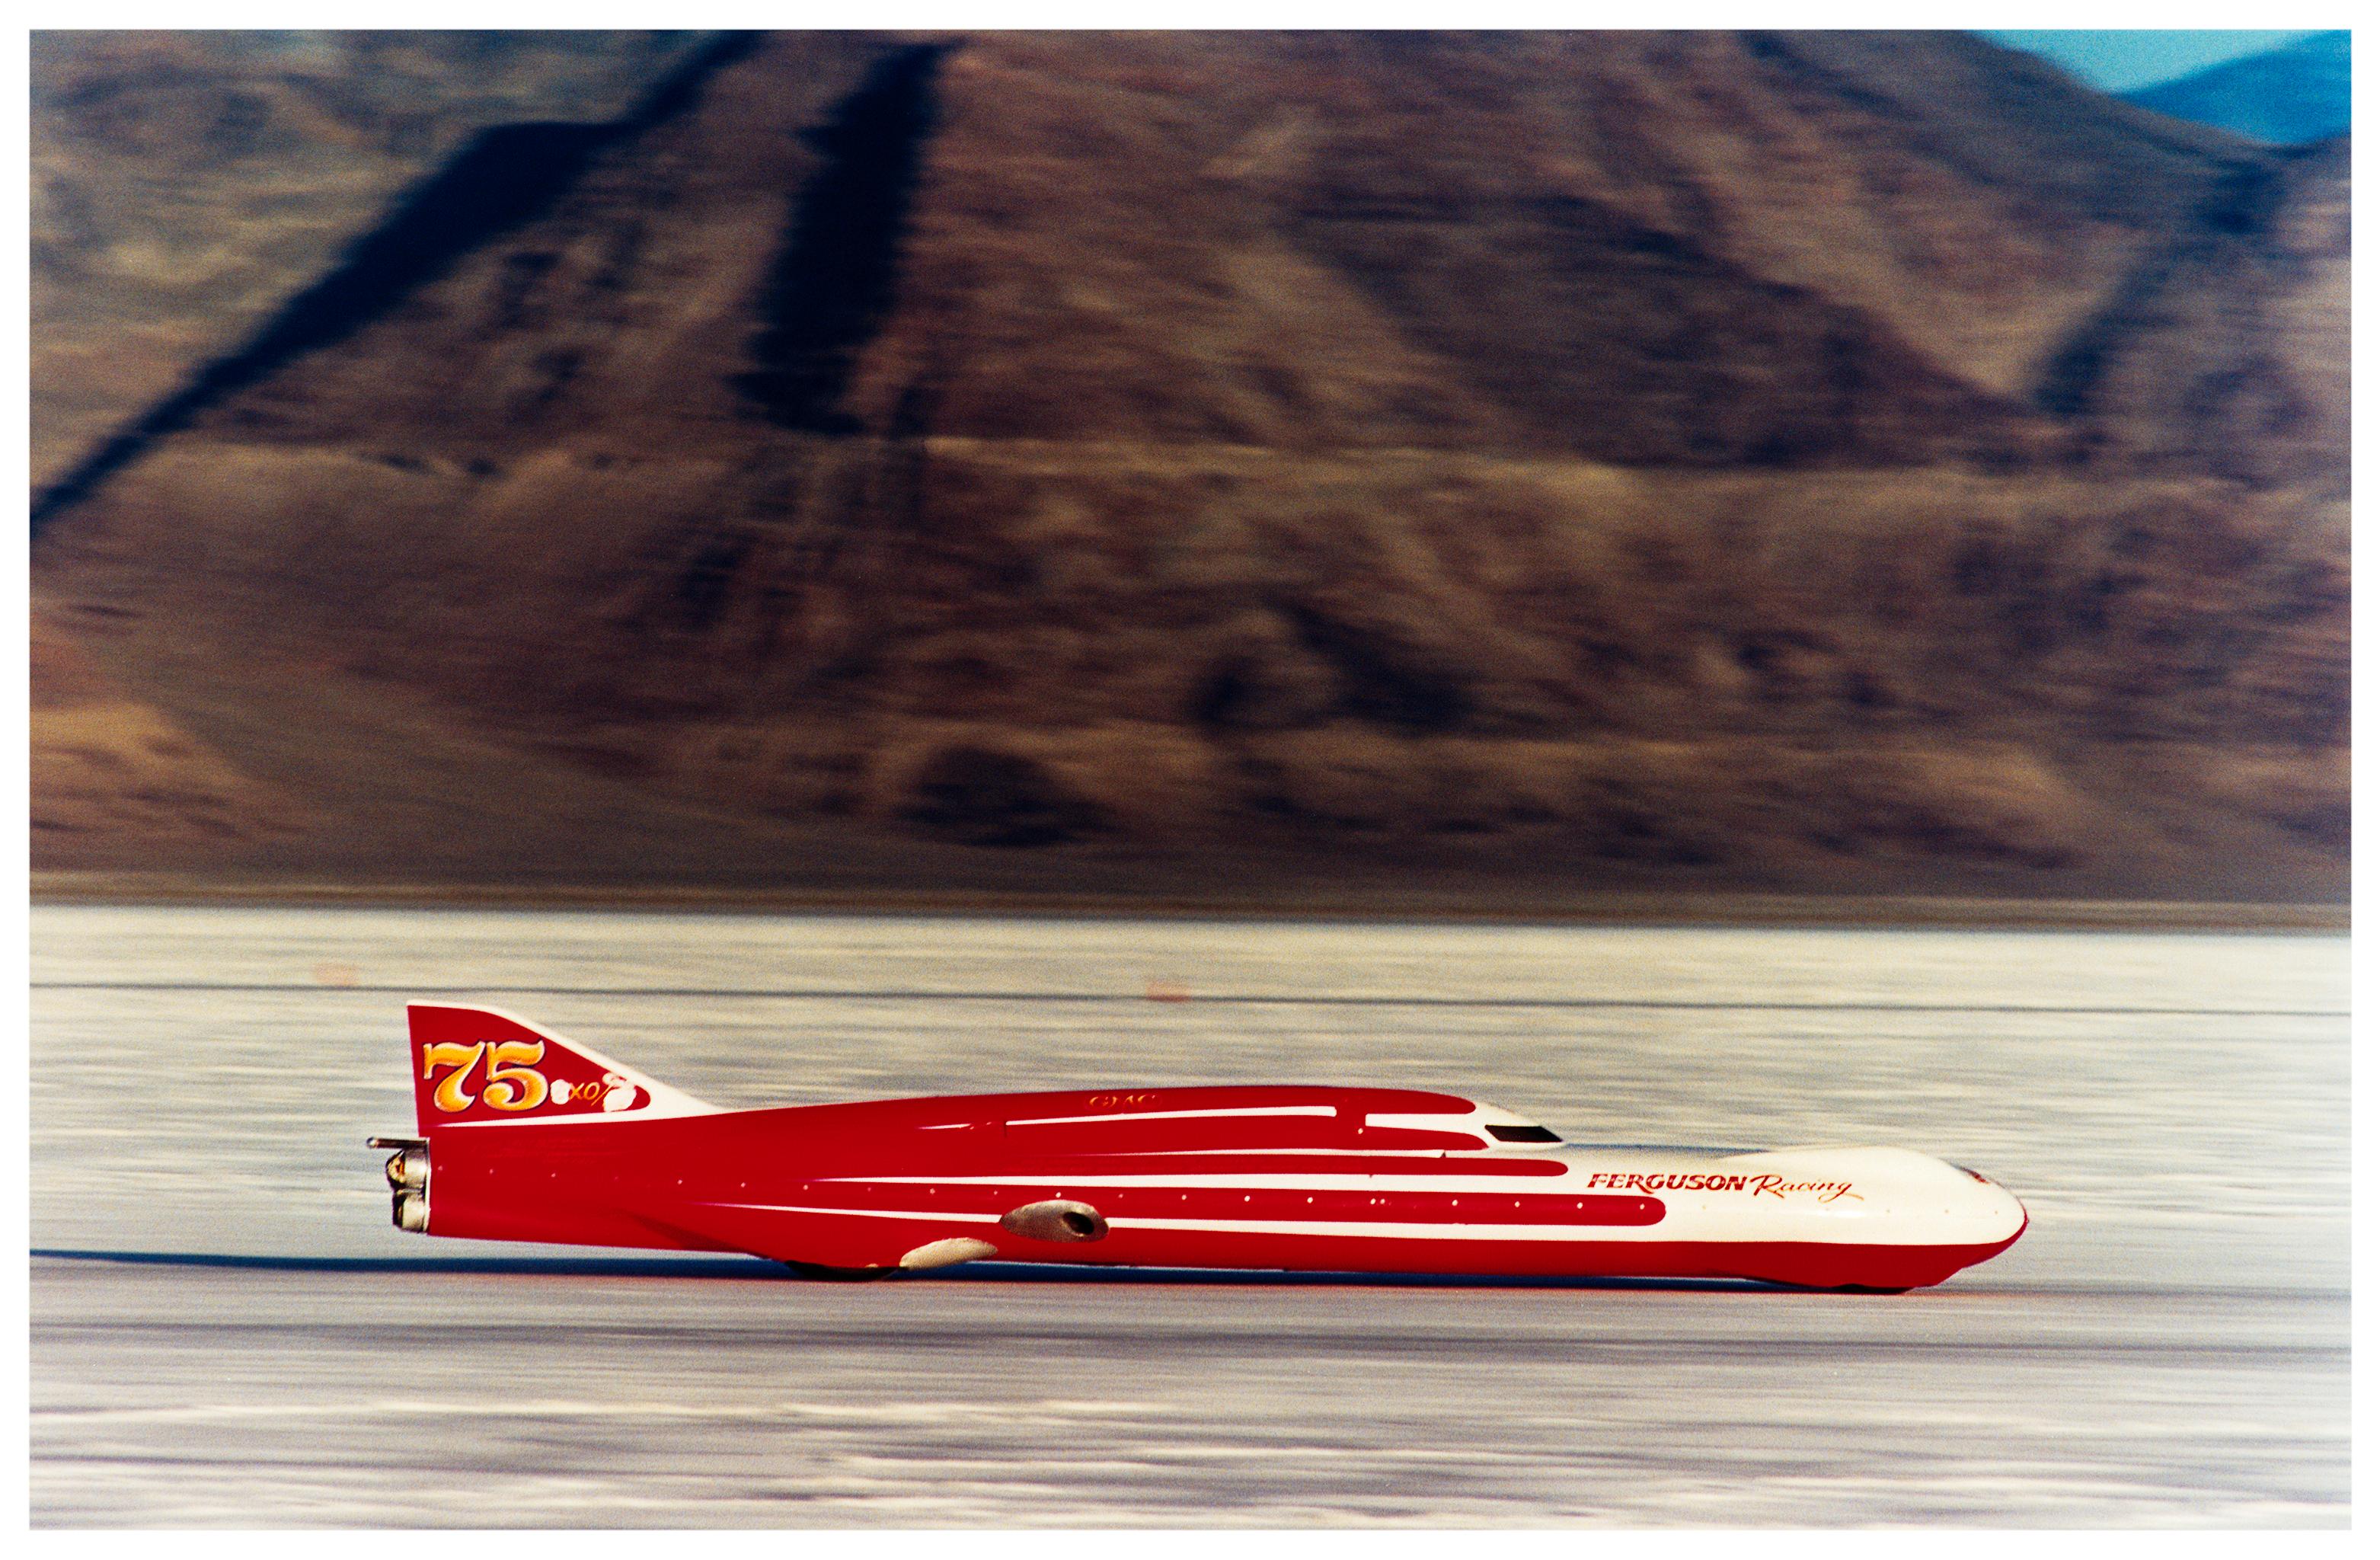 Ferguson Racing Streamliner, photograph taken in the iconic home of speed, Bonneville Salt Flats, just as the mountains contrast with the flat salt lake, Richard Heeps captured this racing car at high speed contrasting with the still effect of the